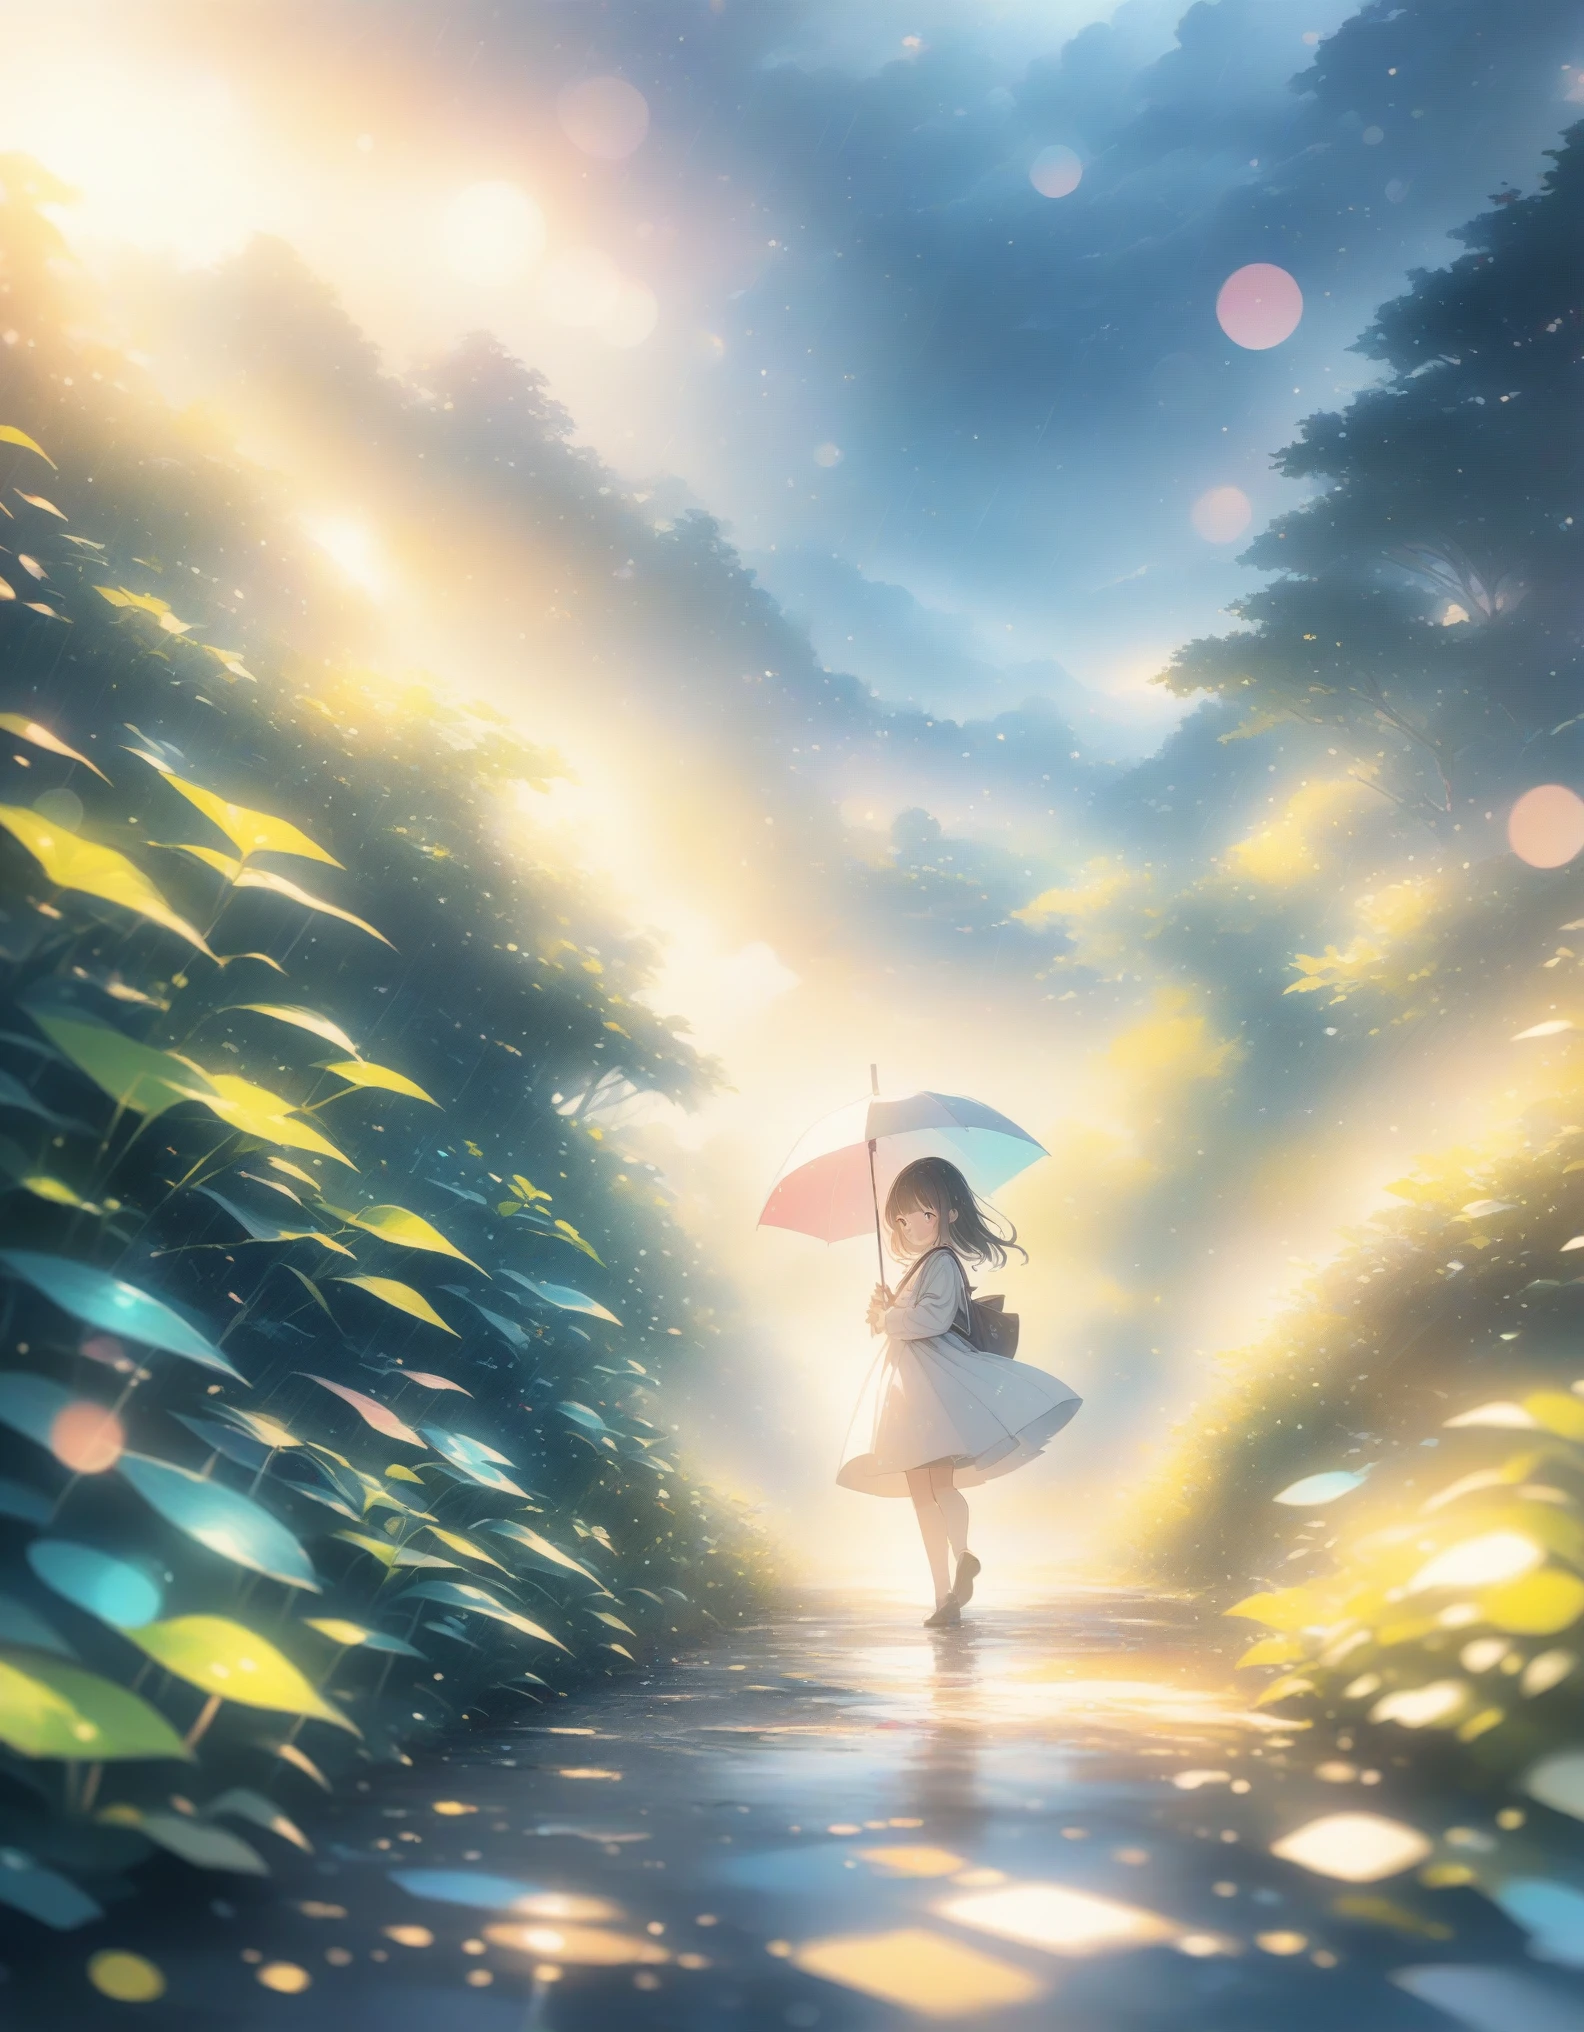 ((style:Colored pencil,pale colour)),(anime)、(masterpiece:1.2),atmospheric perspective,lens flare, f/2.8, 135mm、rain、Foggy forest、Mysterious Light、girl、The surroundings seem hazy